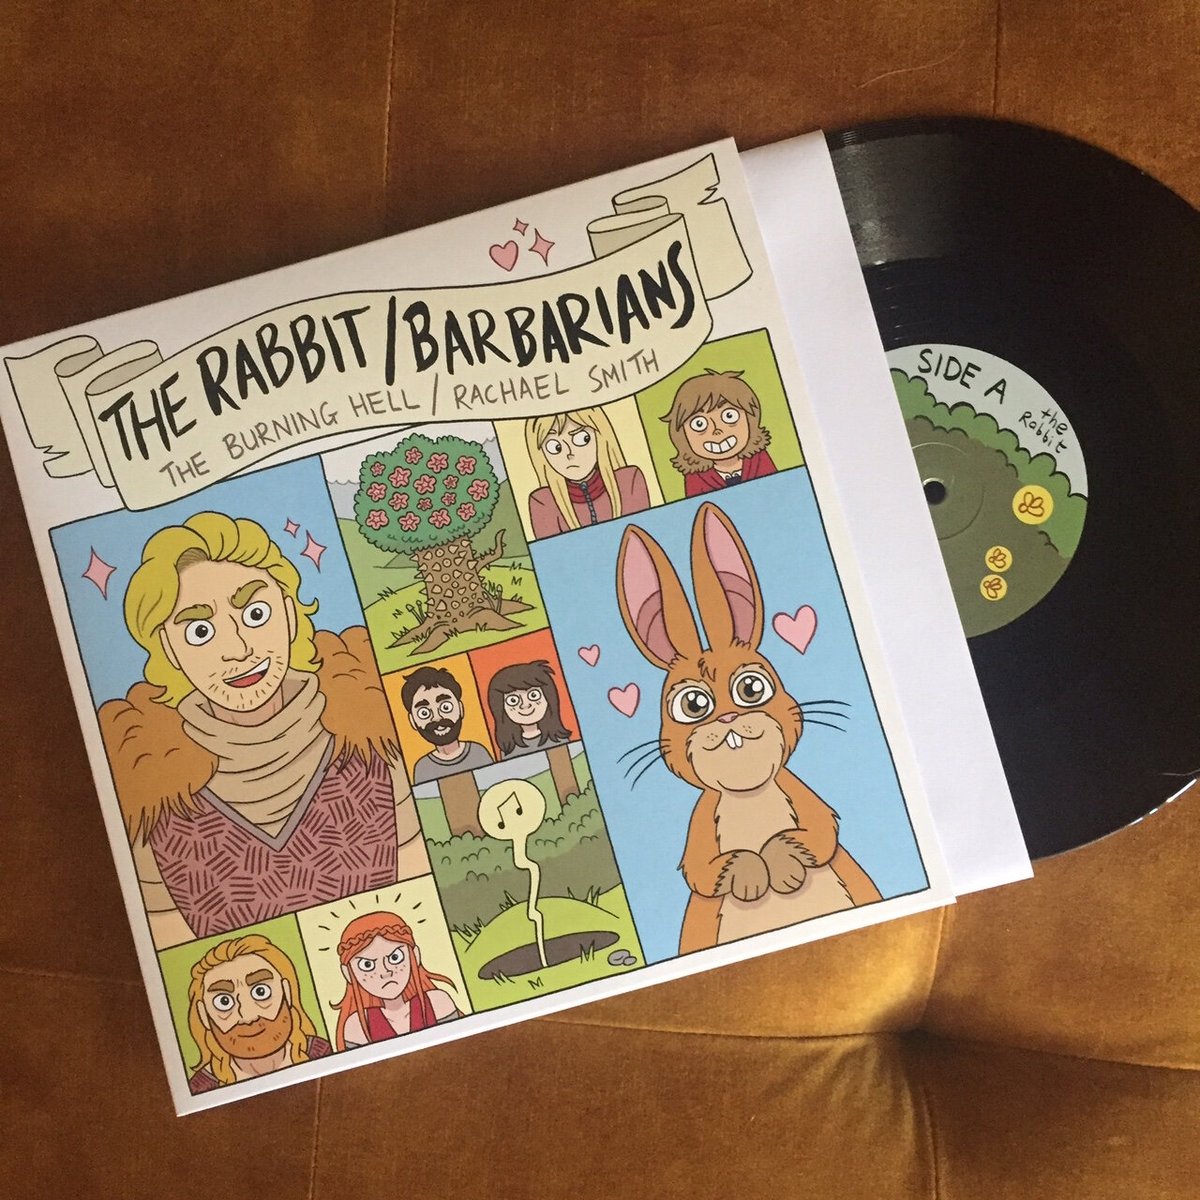 The Rabbit/Barbarians 10" record and Barbarians, The Comic Book